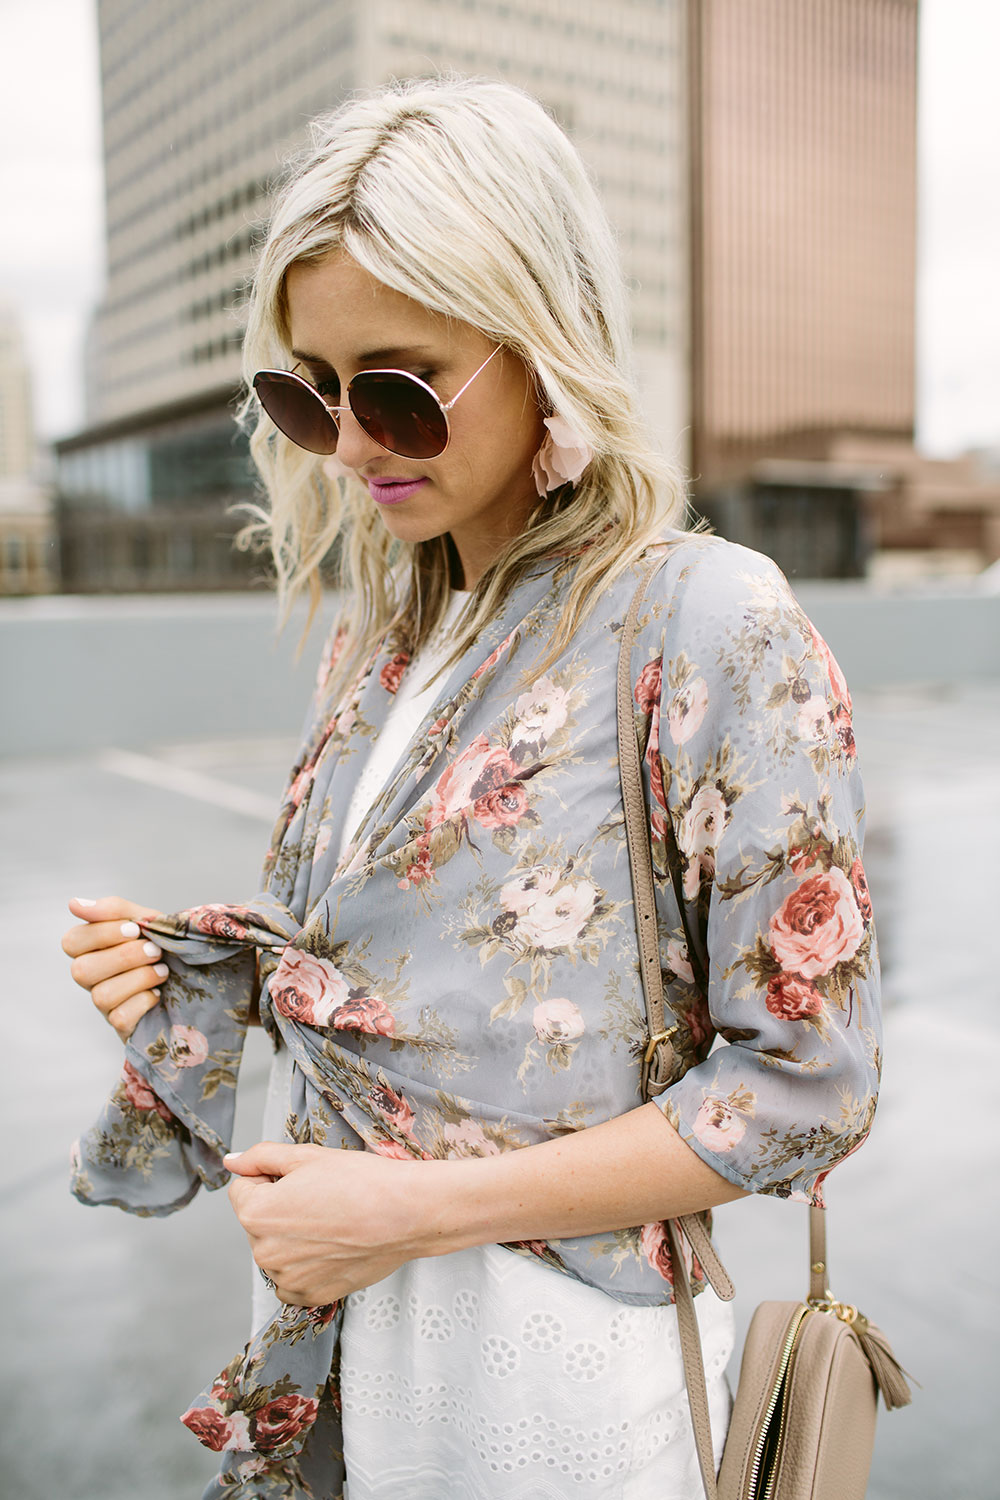 White lace eyelet dress with sheer floral kimono for spring and summer fashion | Little Miss Fearless